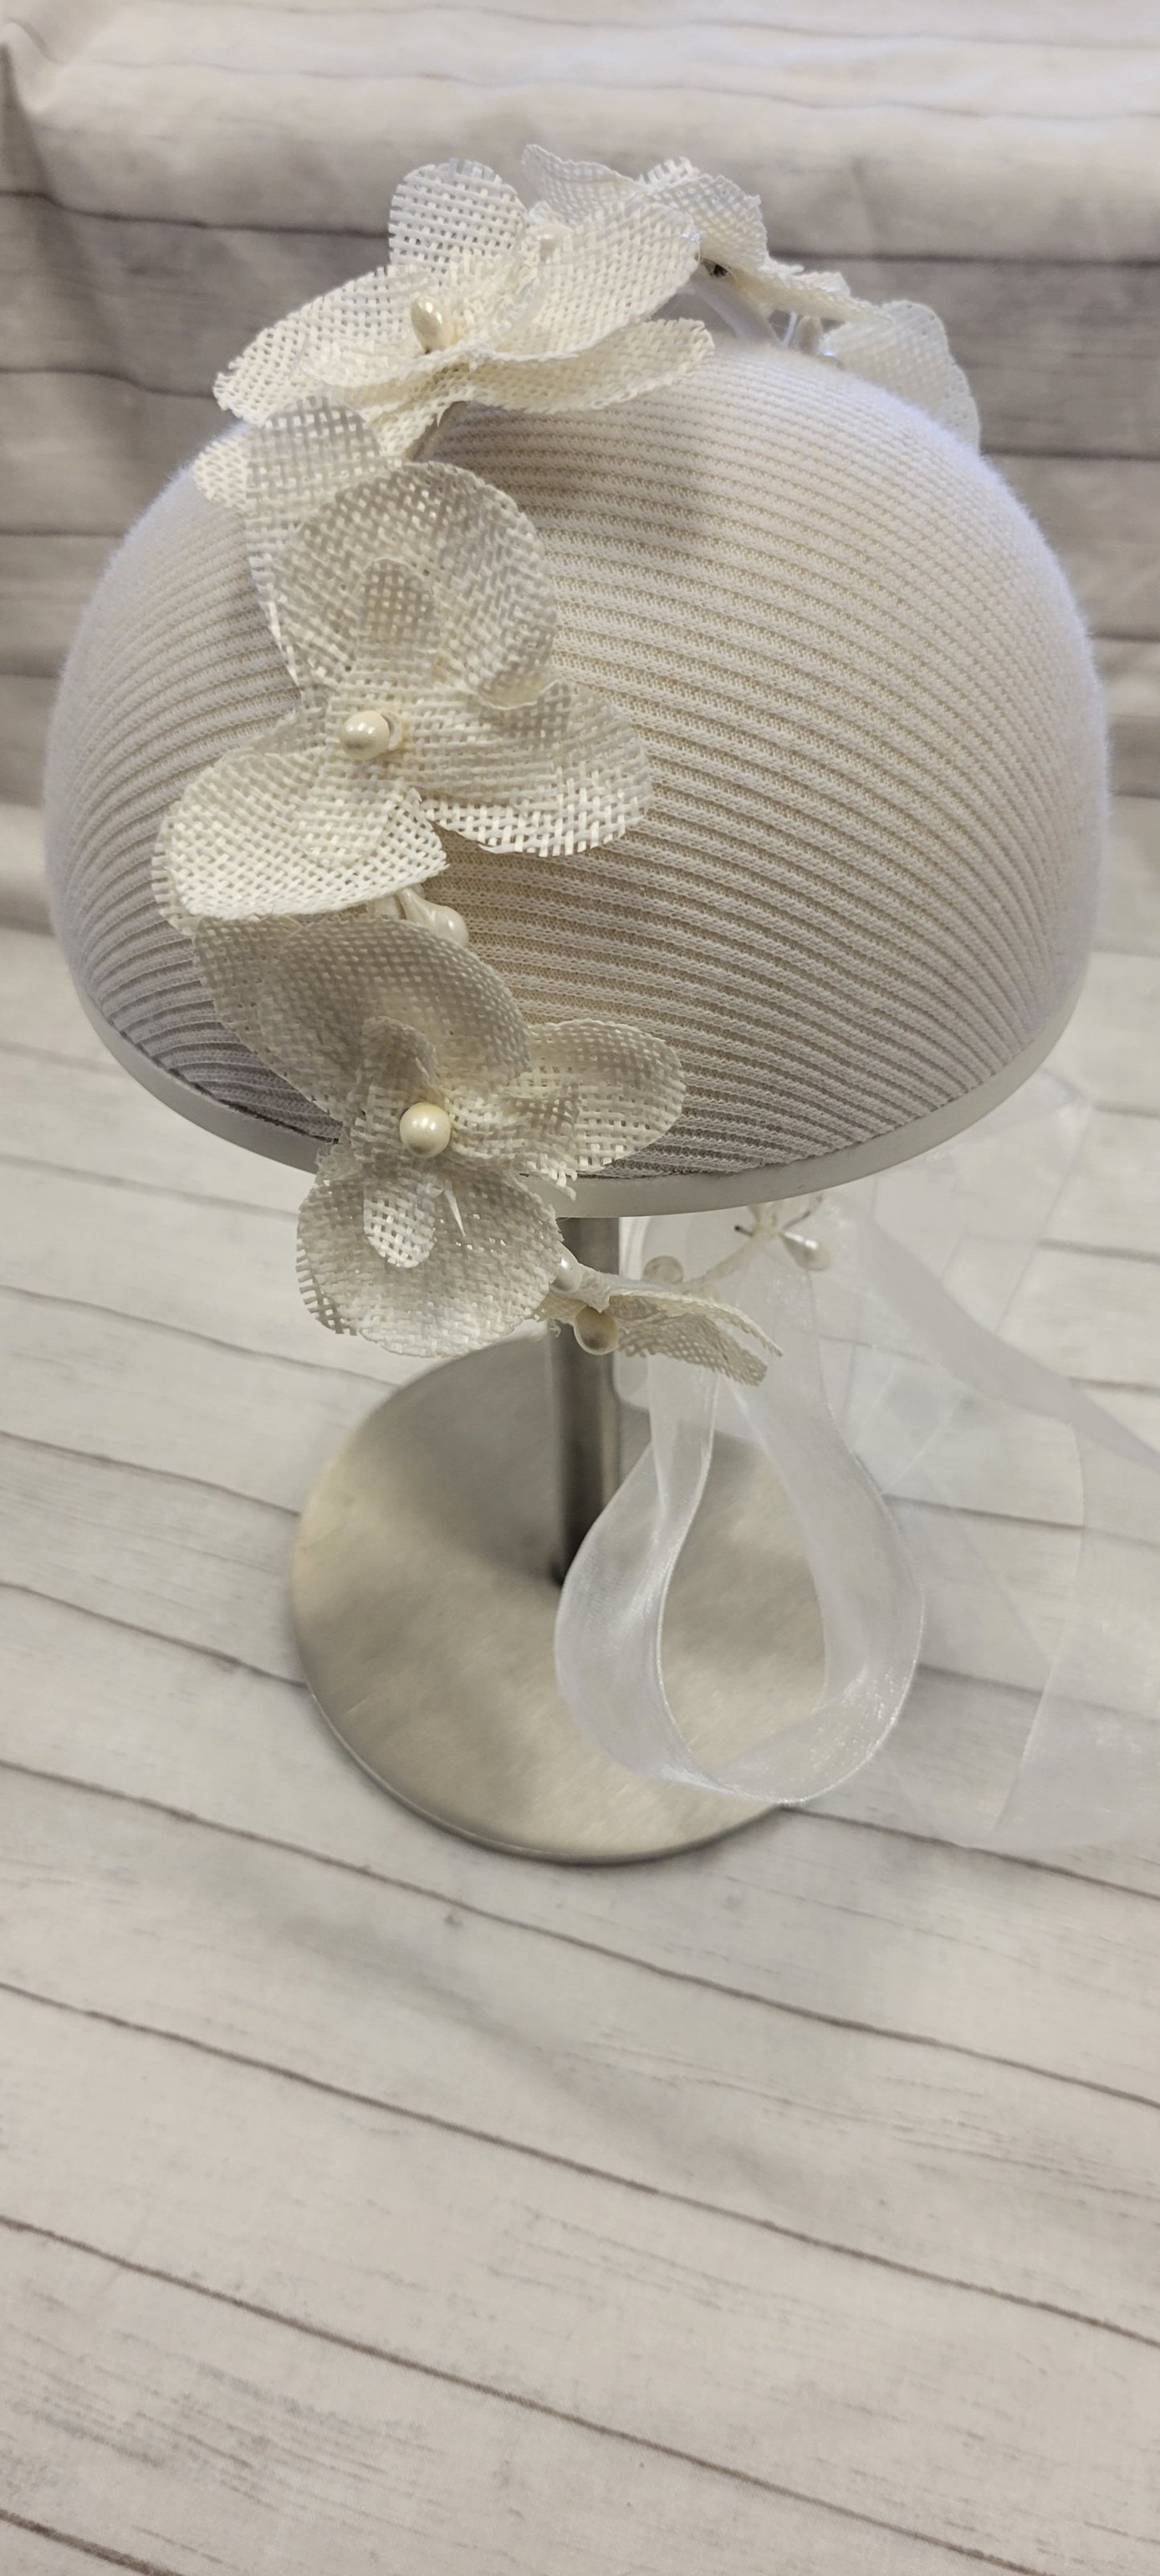 Girls First Communion Flower Crown Veil. Features Organza Flowers with Rhinestones and Pearls